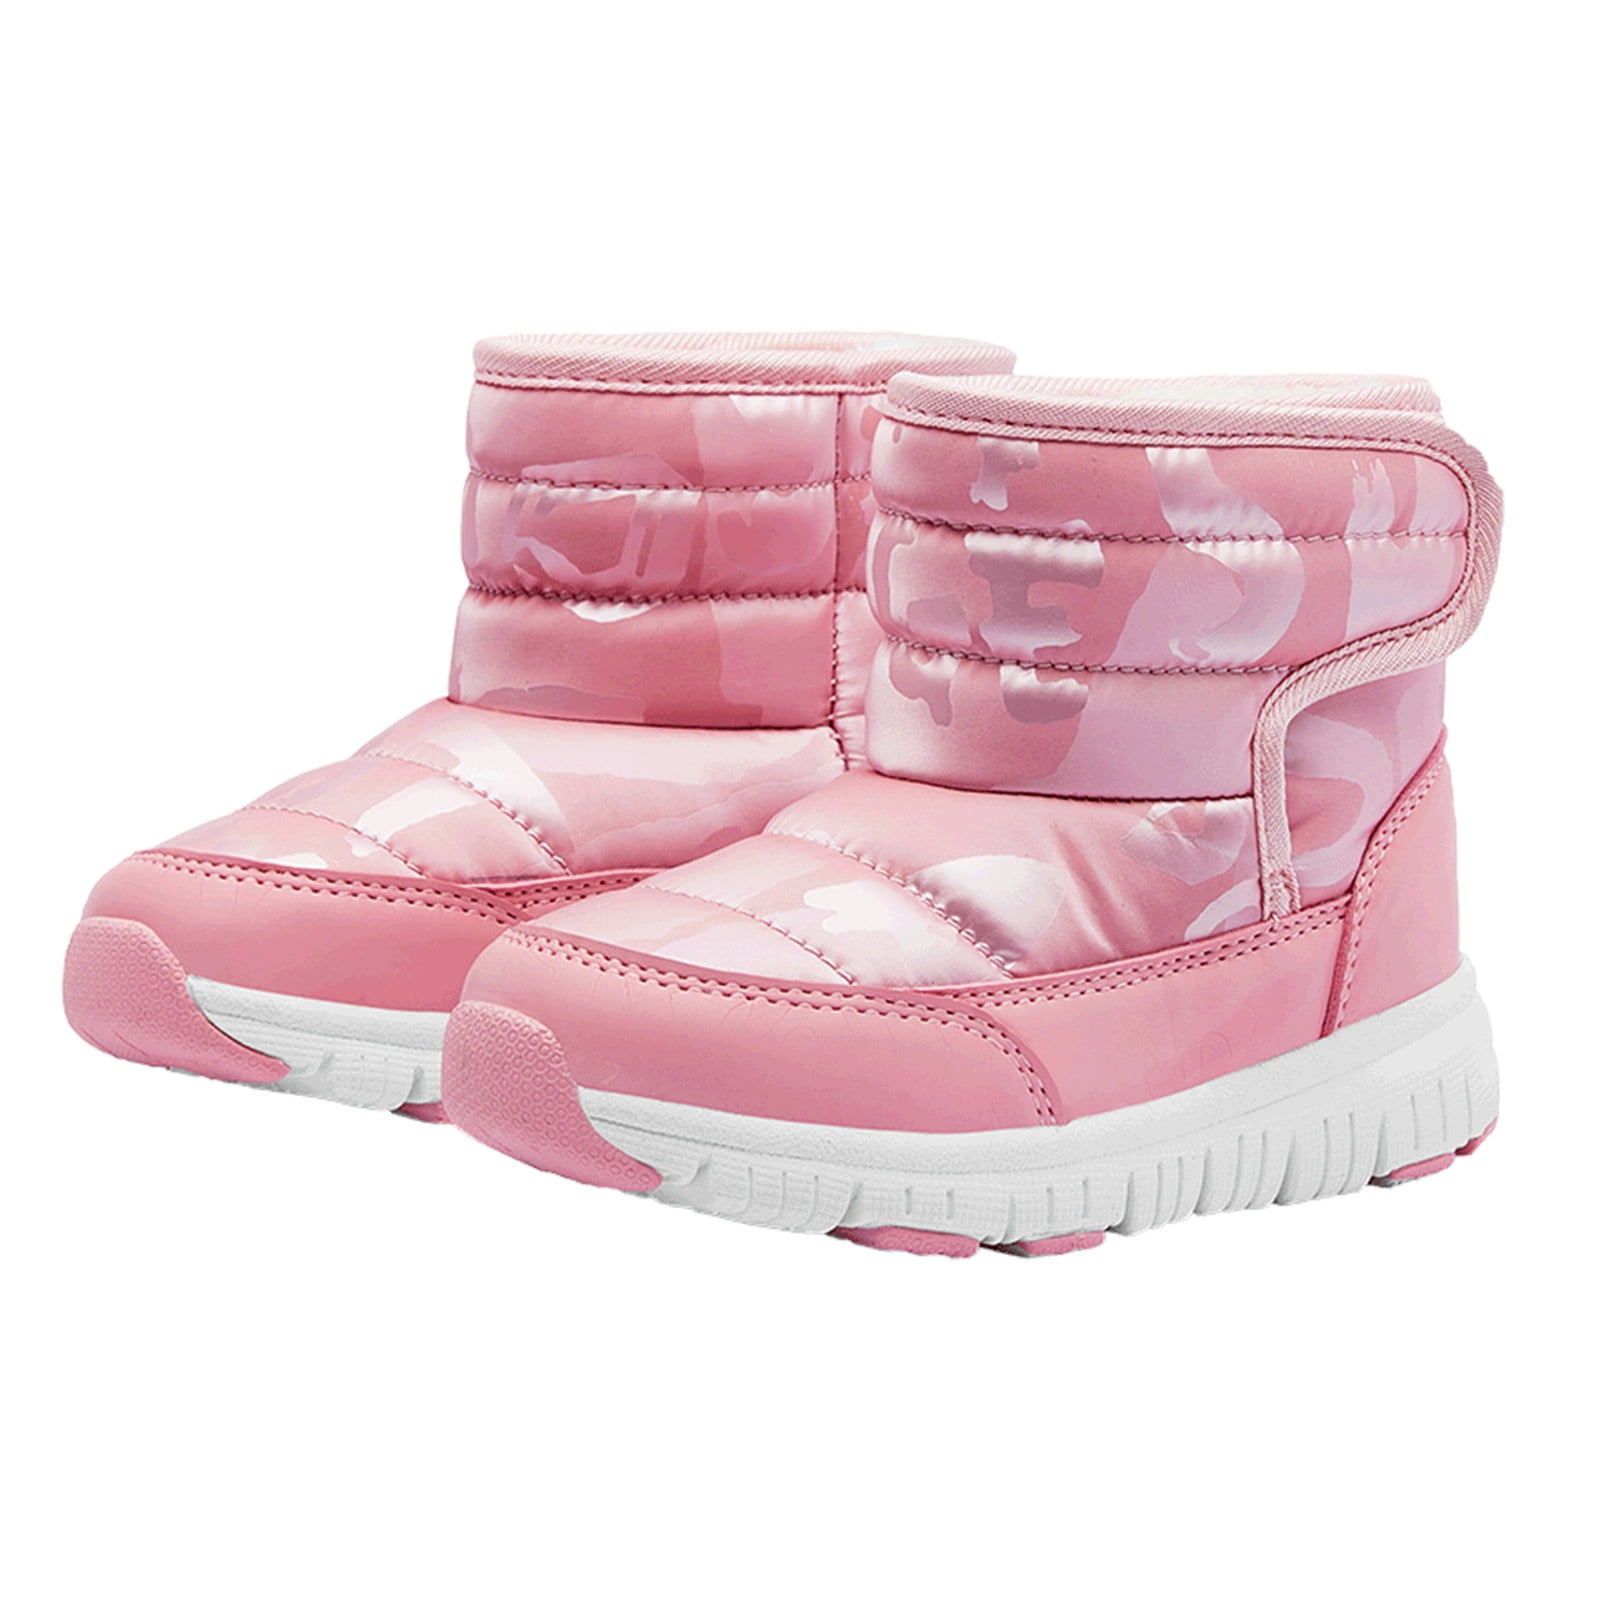 Toddler/Little Kid Girls Boys Snow Boots Baby Winter Warm Fur Lined Boots Ankle Booties Kids Flat Waterproof Shoes Size